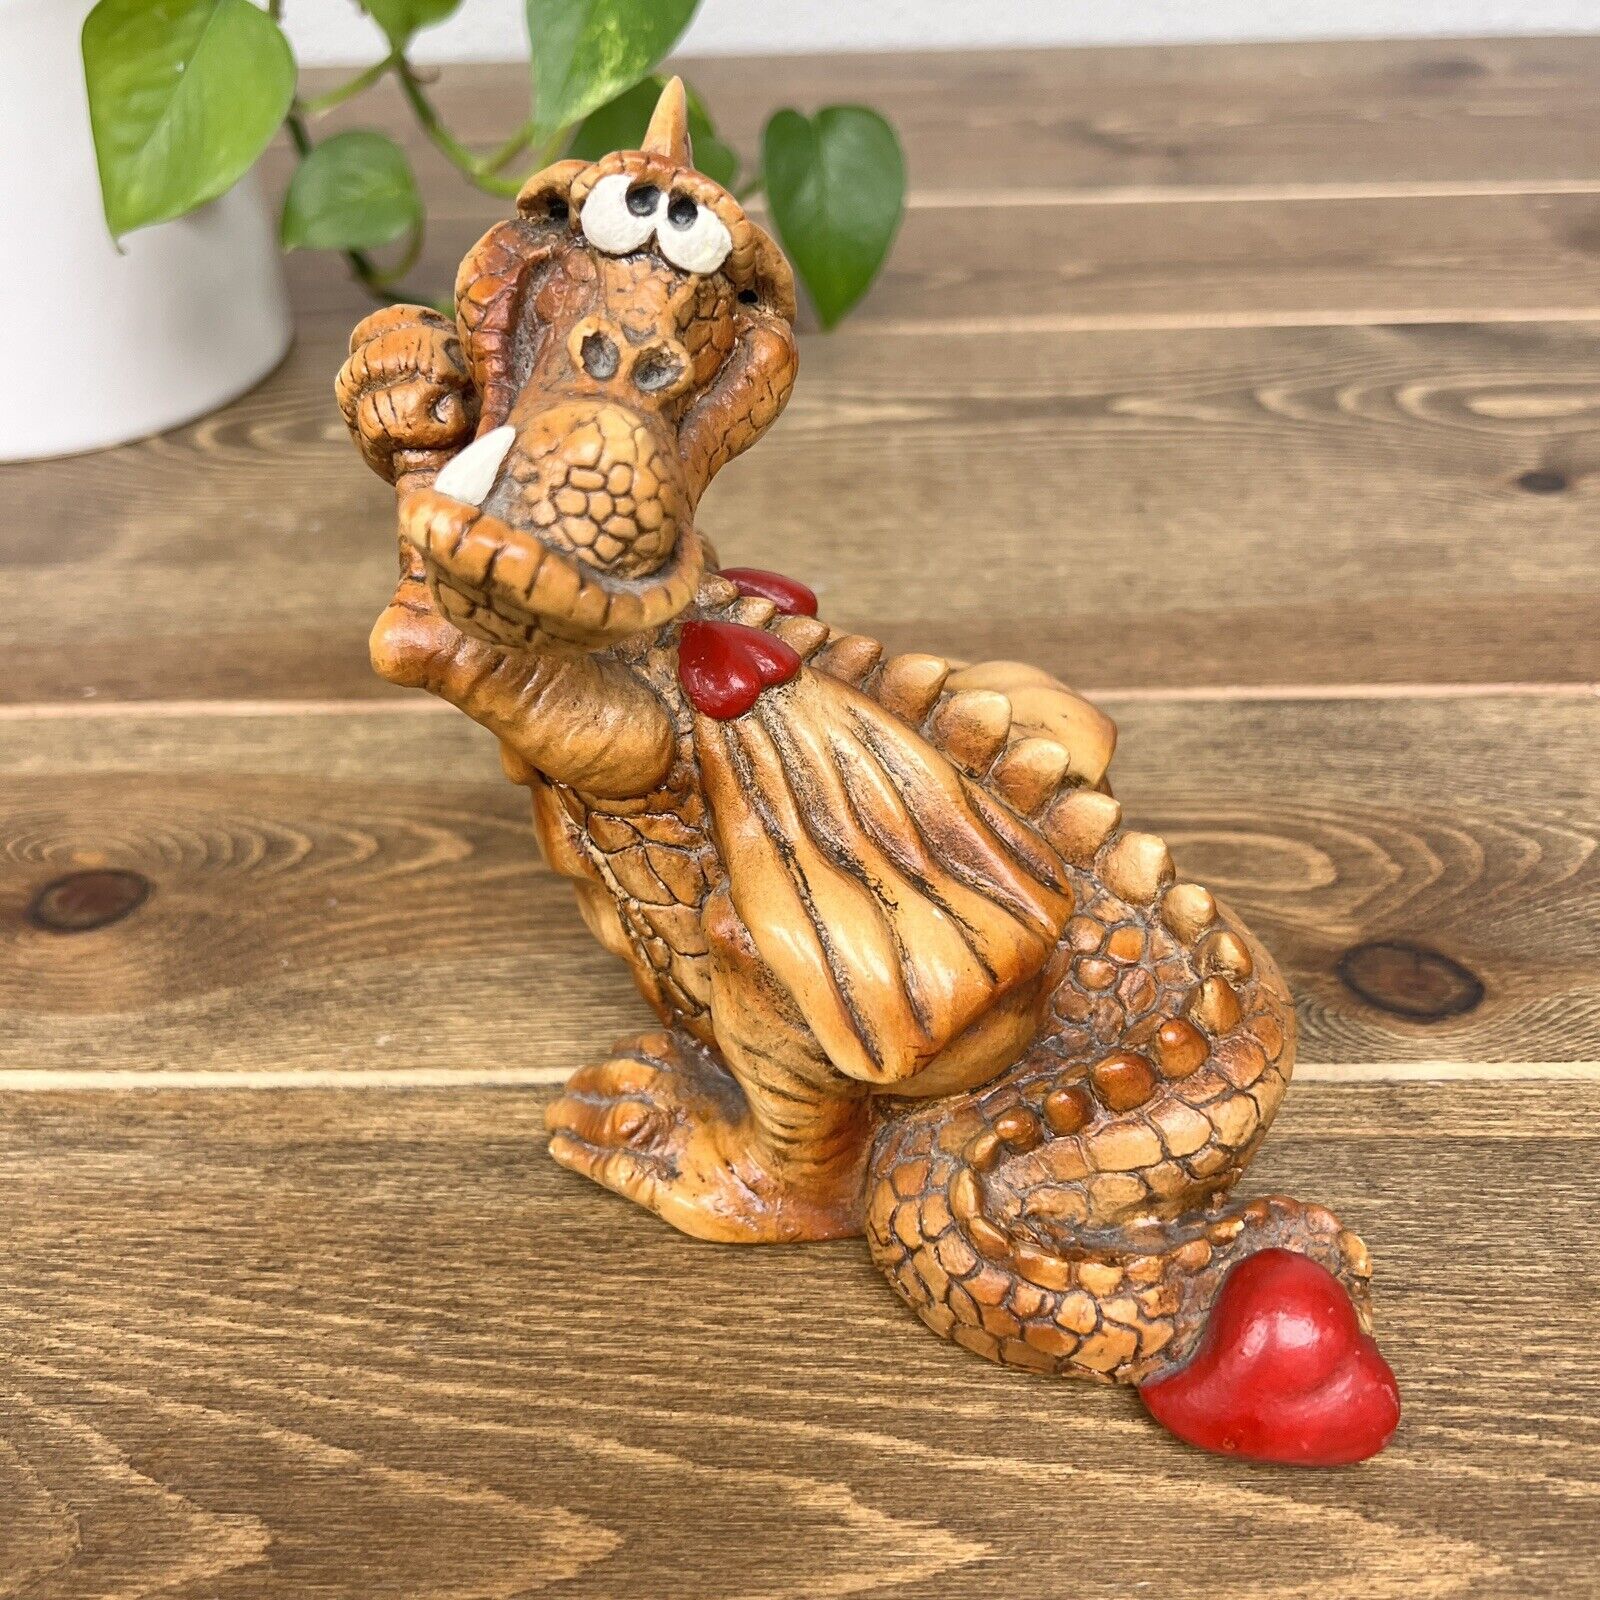 Adorable Dragon Figurine, Signed By Hackett 1985